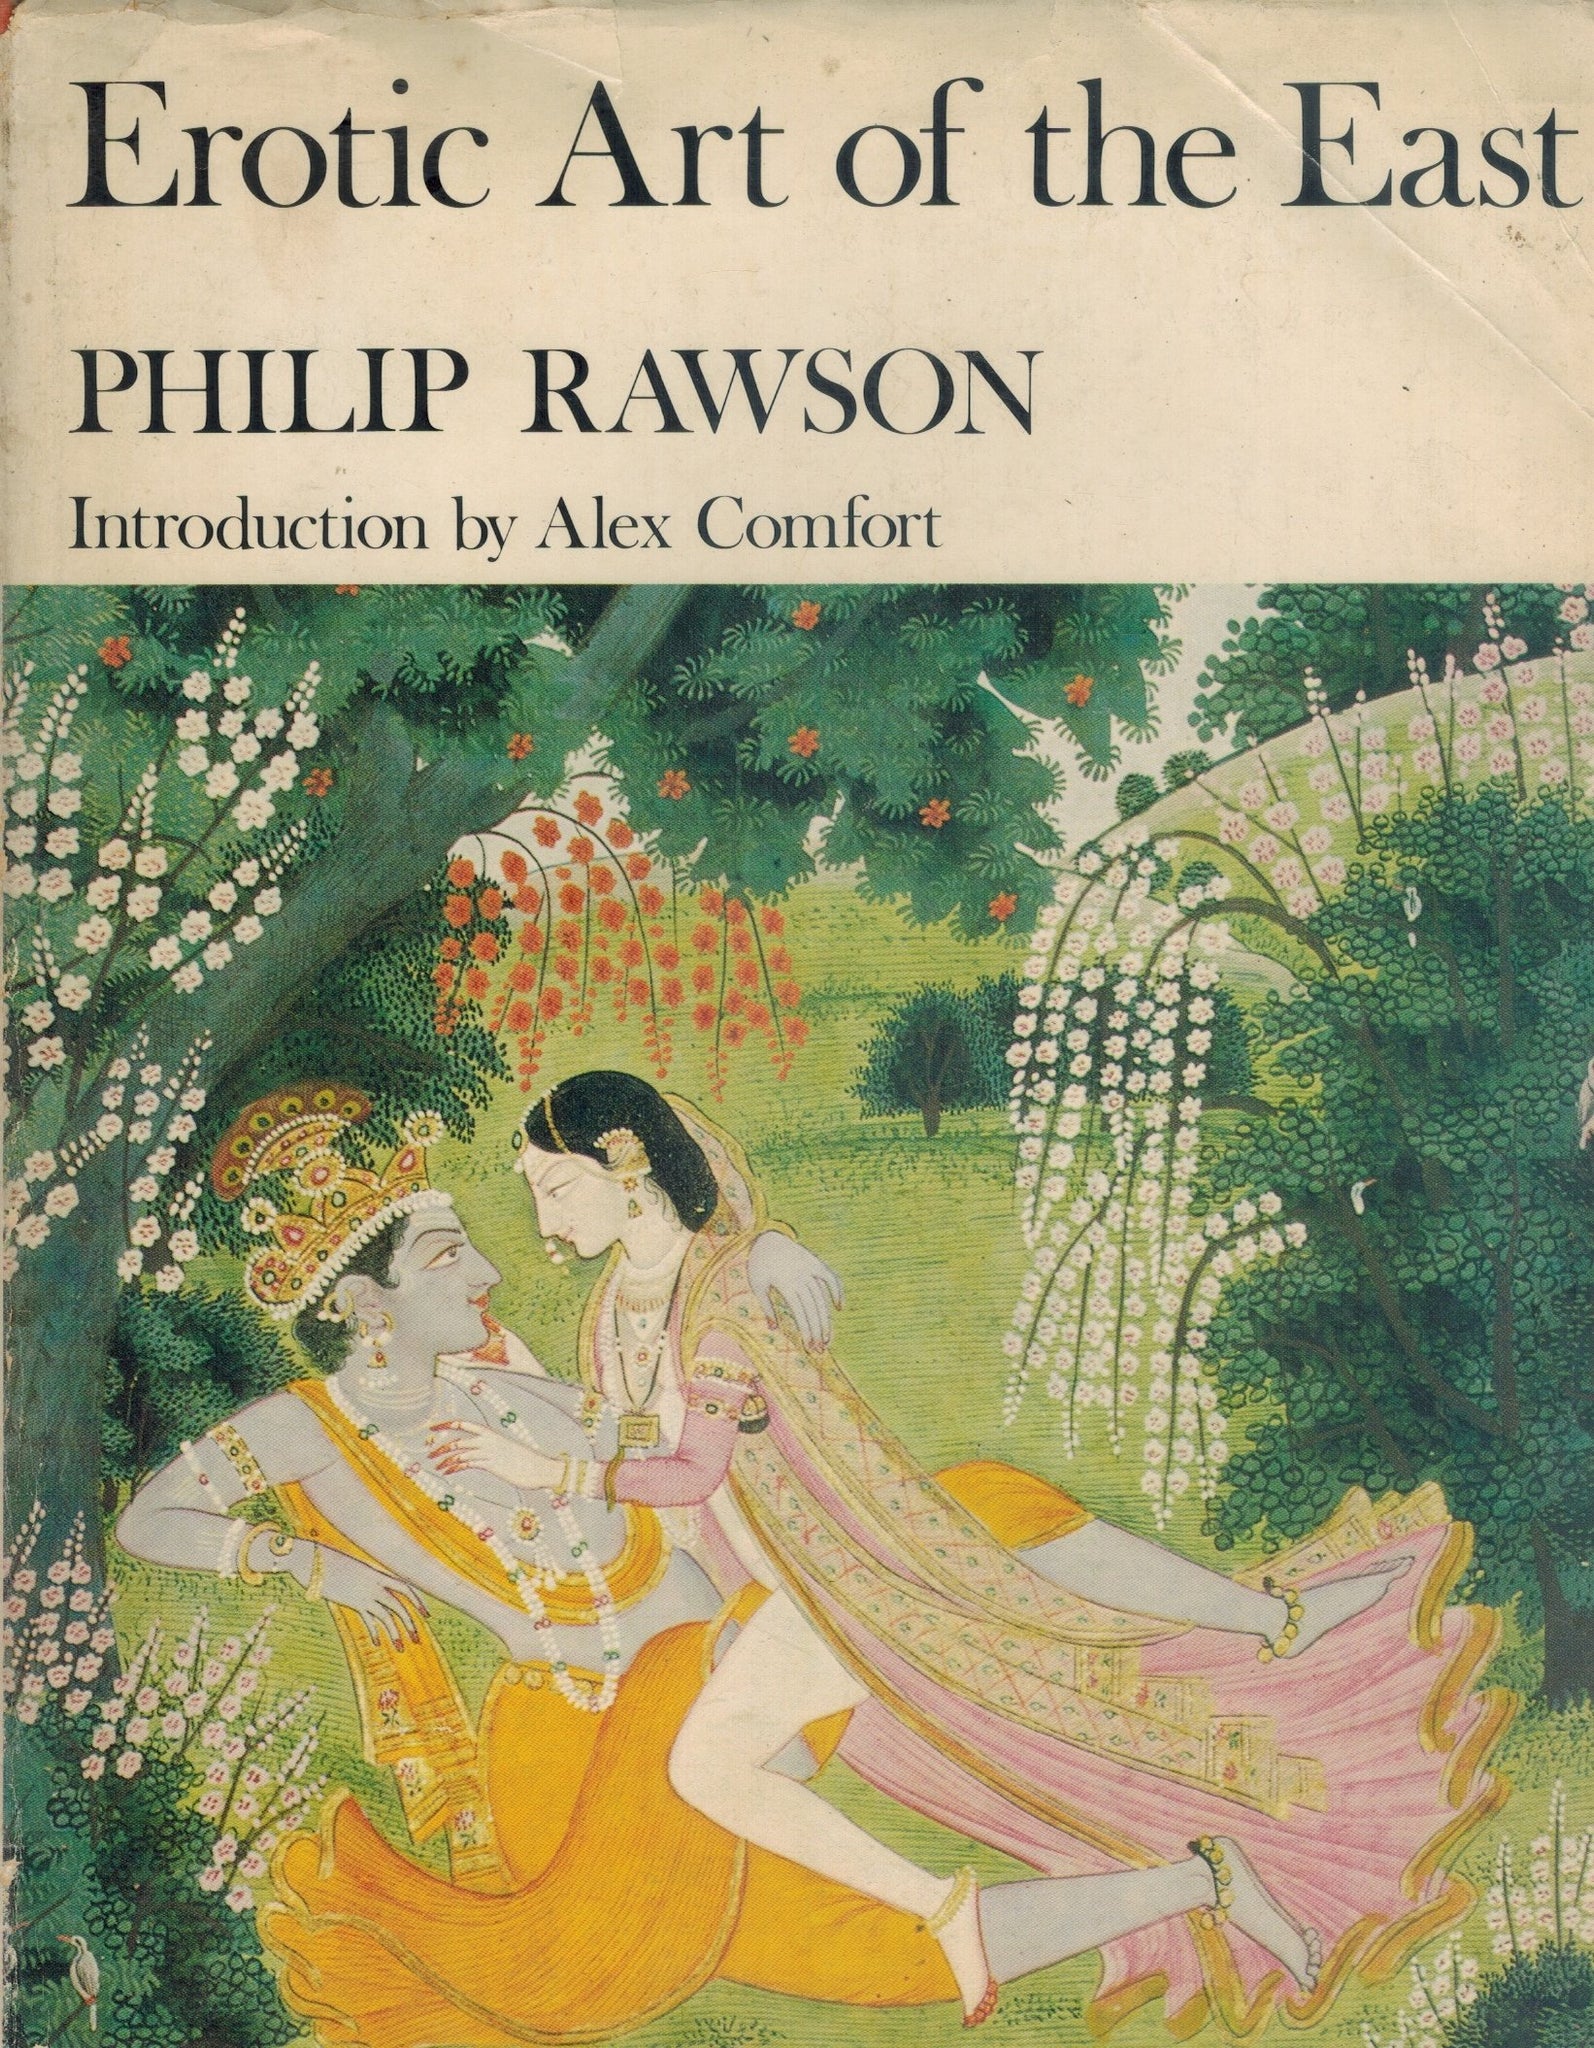 EROTIC ART OF THE EAST  by Rawson, Philip